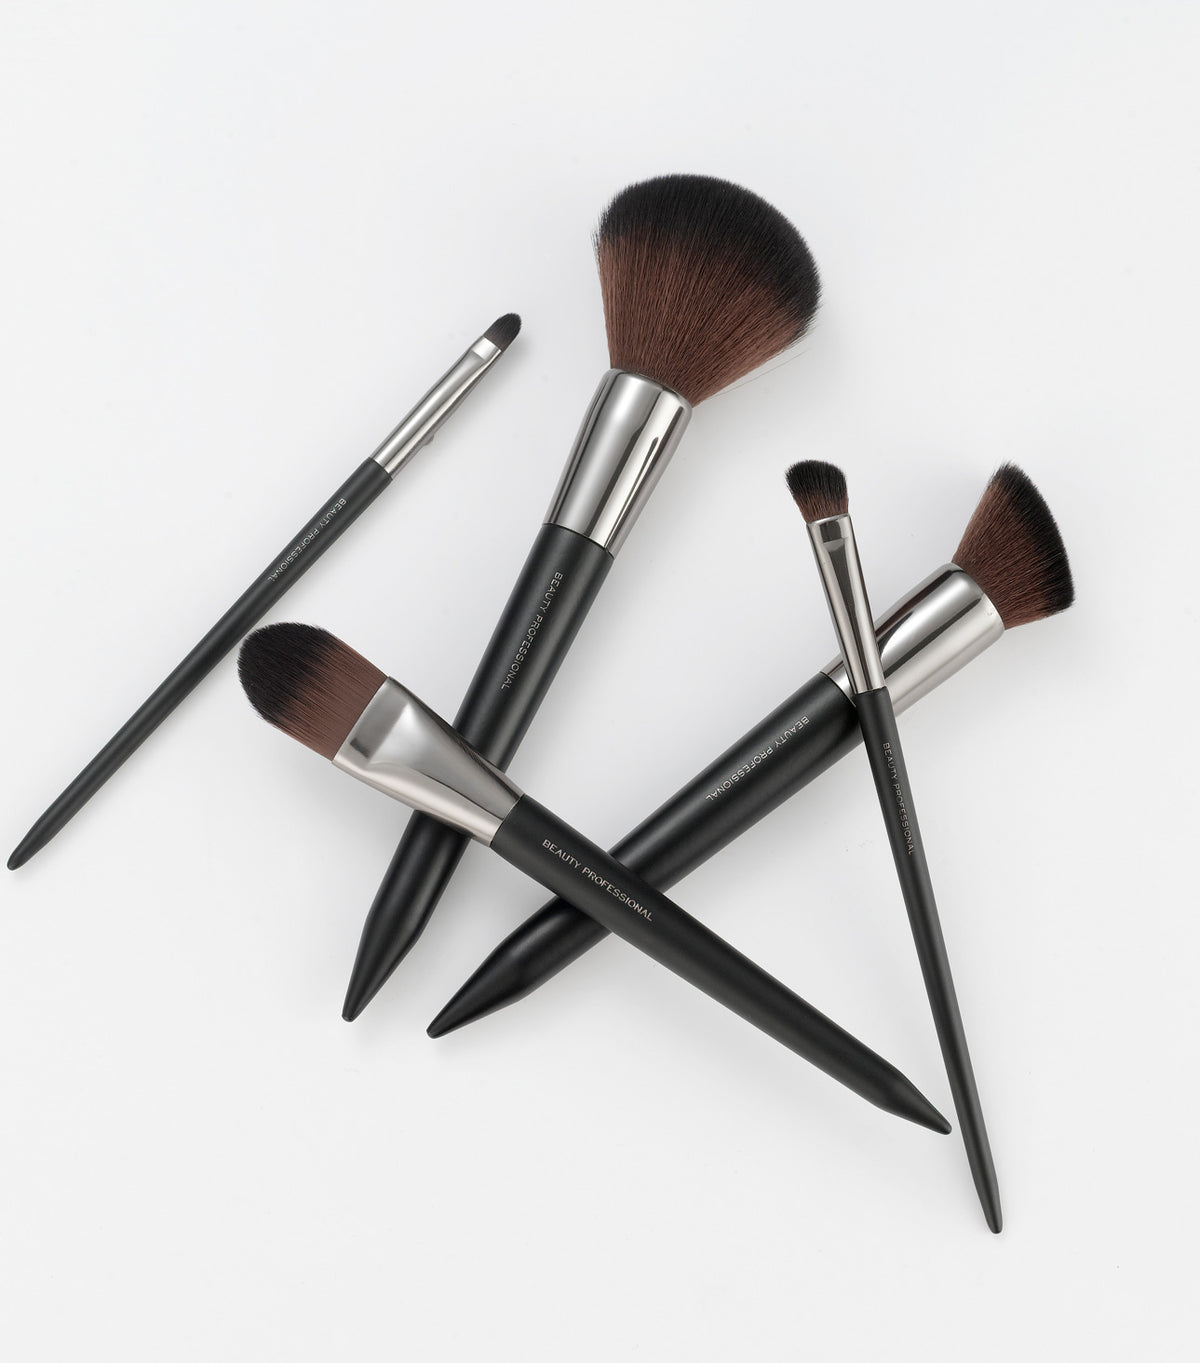 THE ESSENTIAL LUXE BRUSH SET